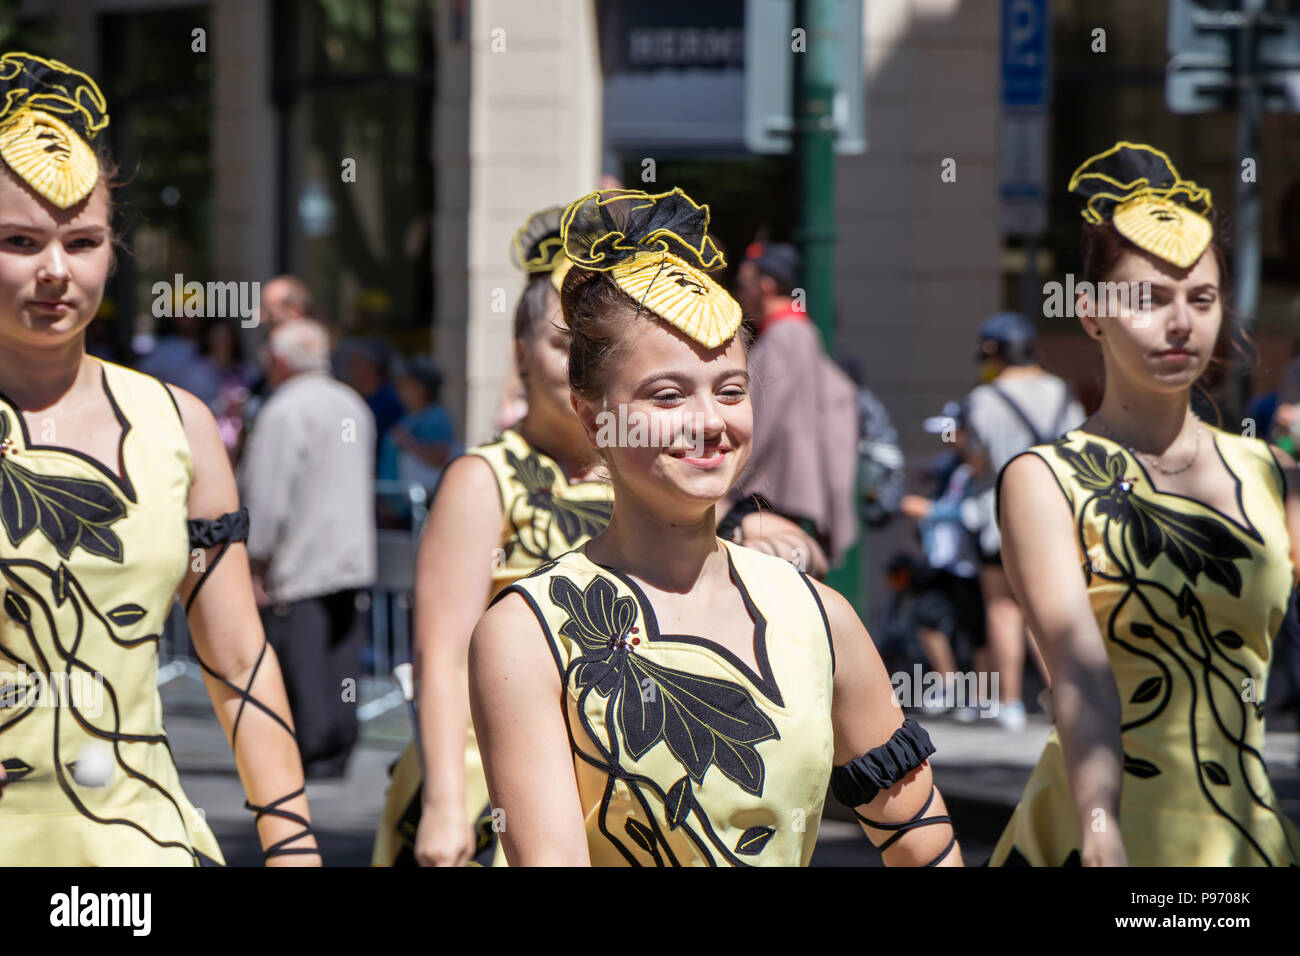 PRAGUE, CZECH REPUBLIC - JULY 1, 2018: Majorettes parading at Sokolsky Slet, a once-every-six-years gathering of the Sokol movement - a Czech sports a Stock Photo